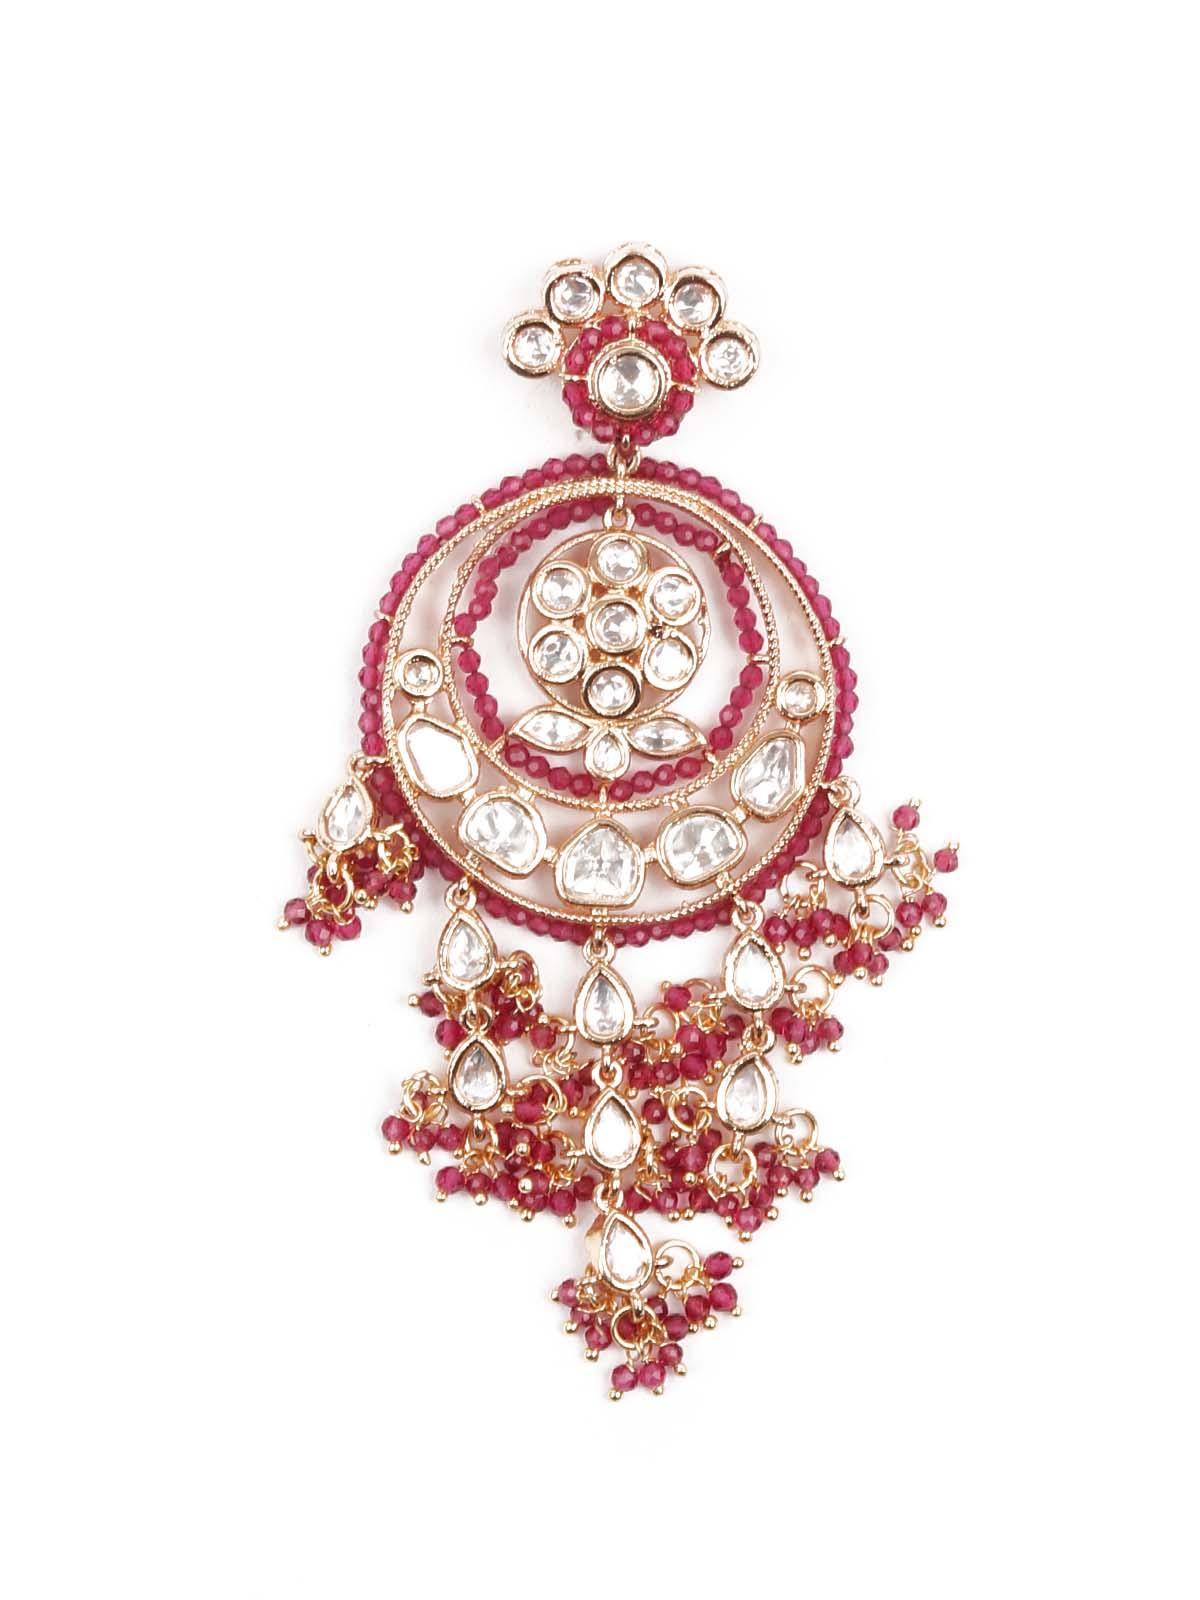 The Royal Red And Gold Hoop With Florets - Odette